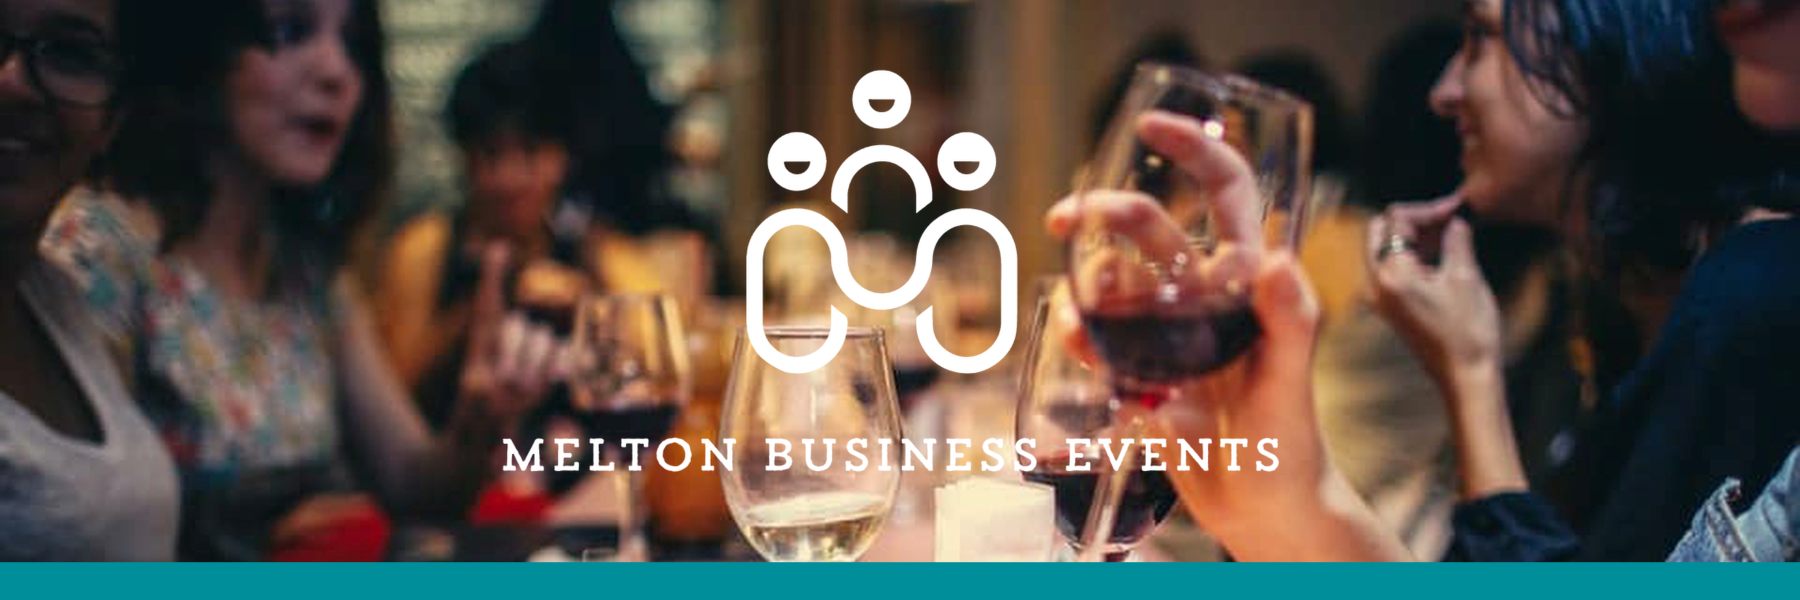 hrh business services networking melton business events